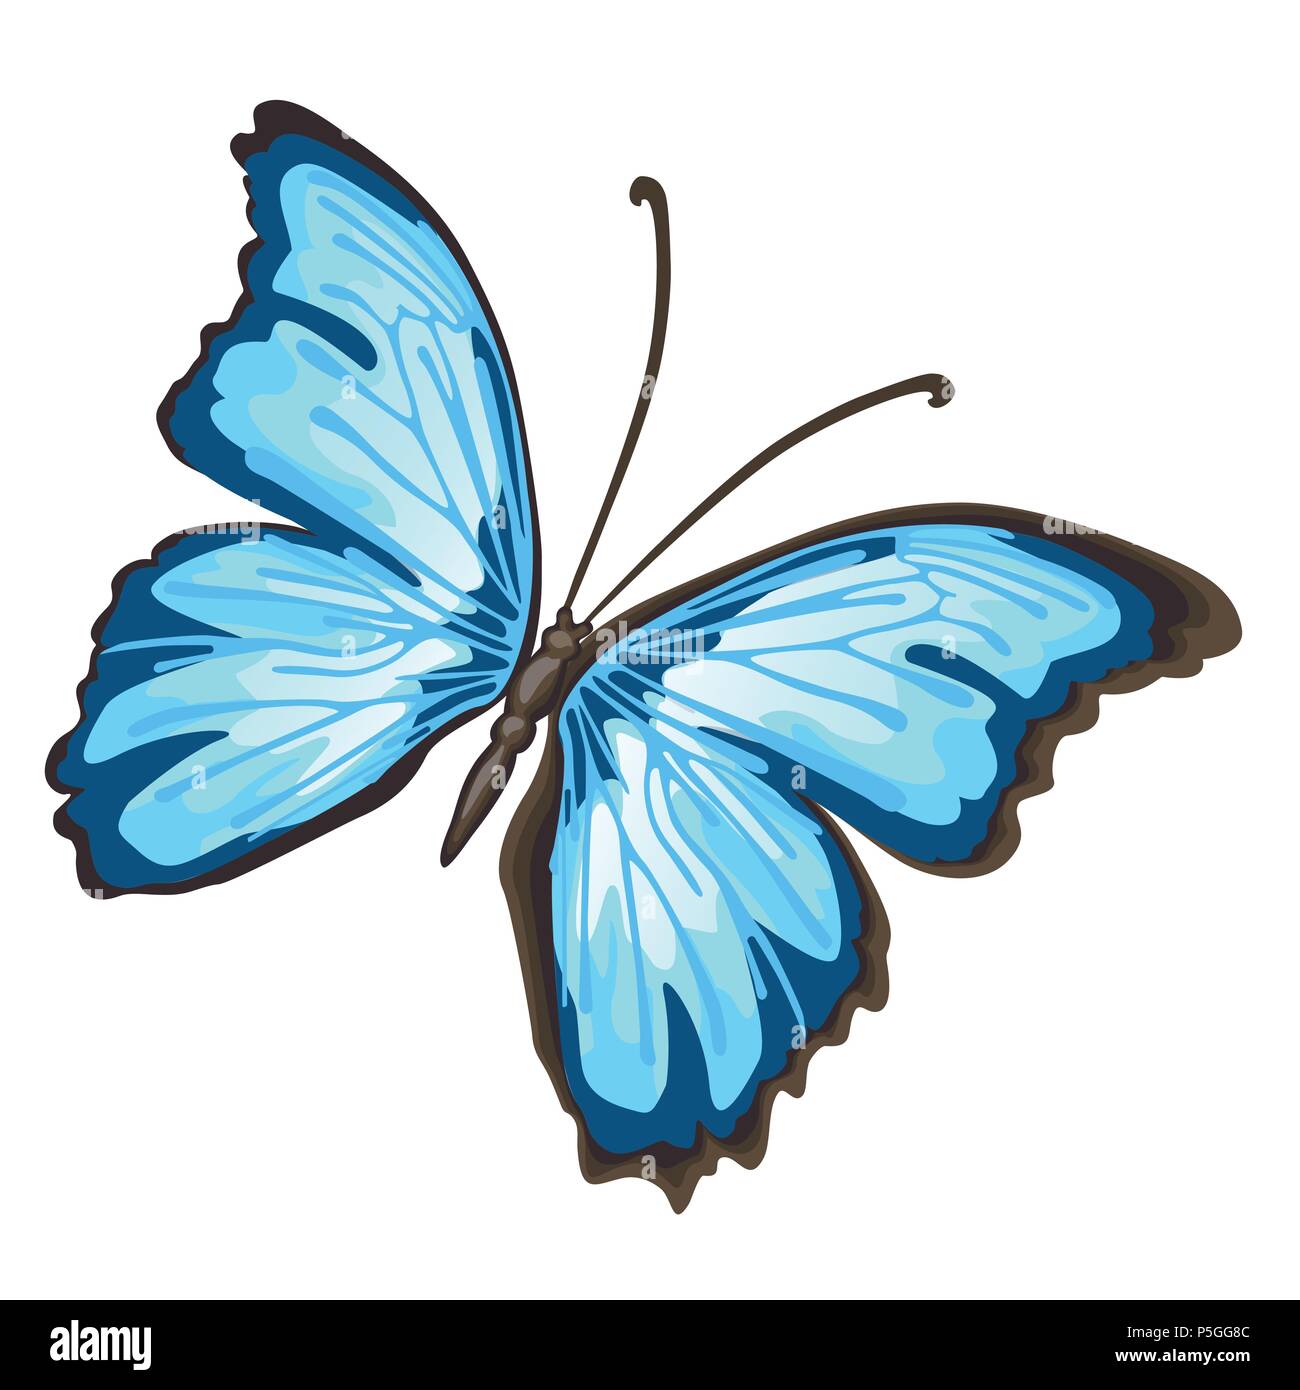 Cartoon butterfly with blue wings isolated on white background ...